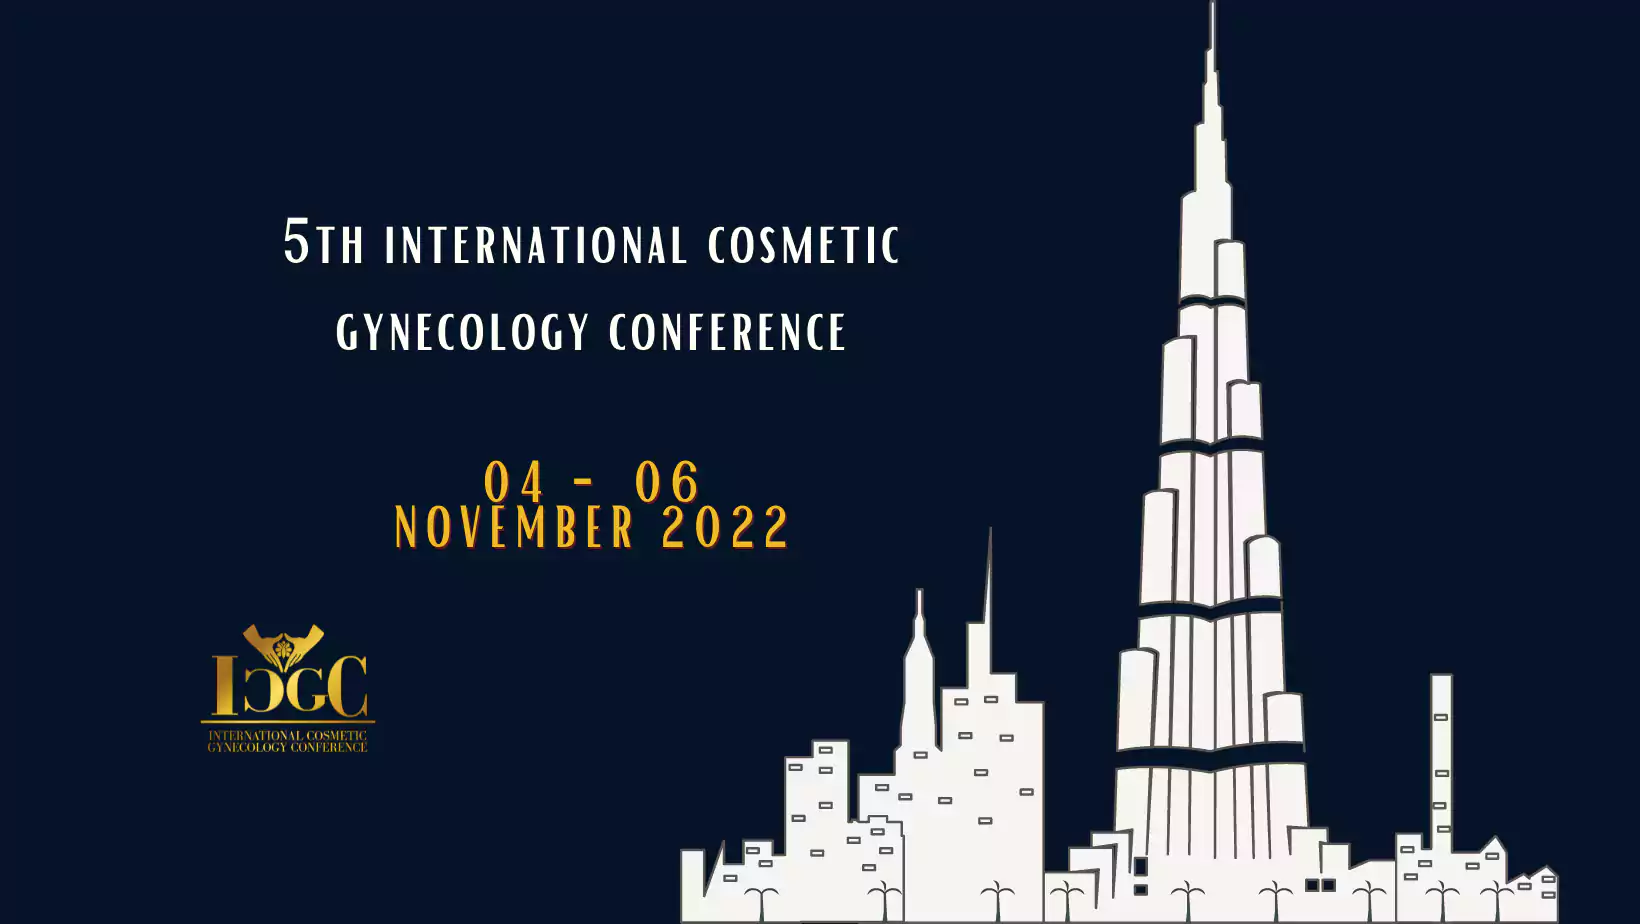 5th International Cosmetic Gynecology Conference